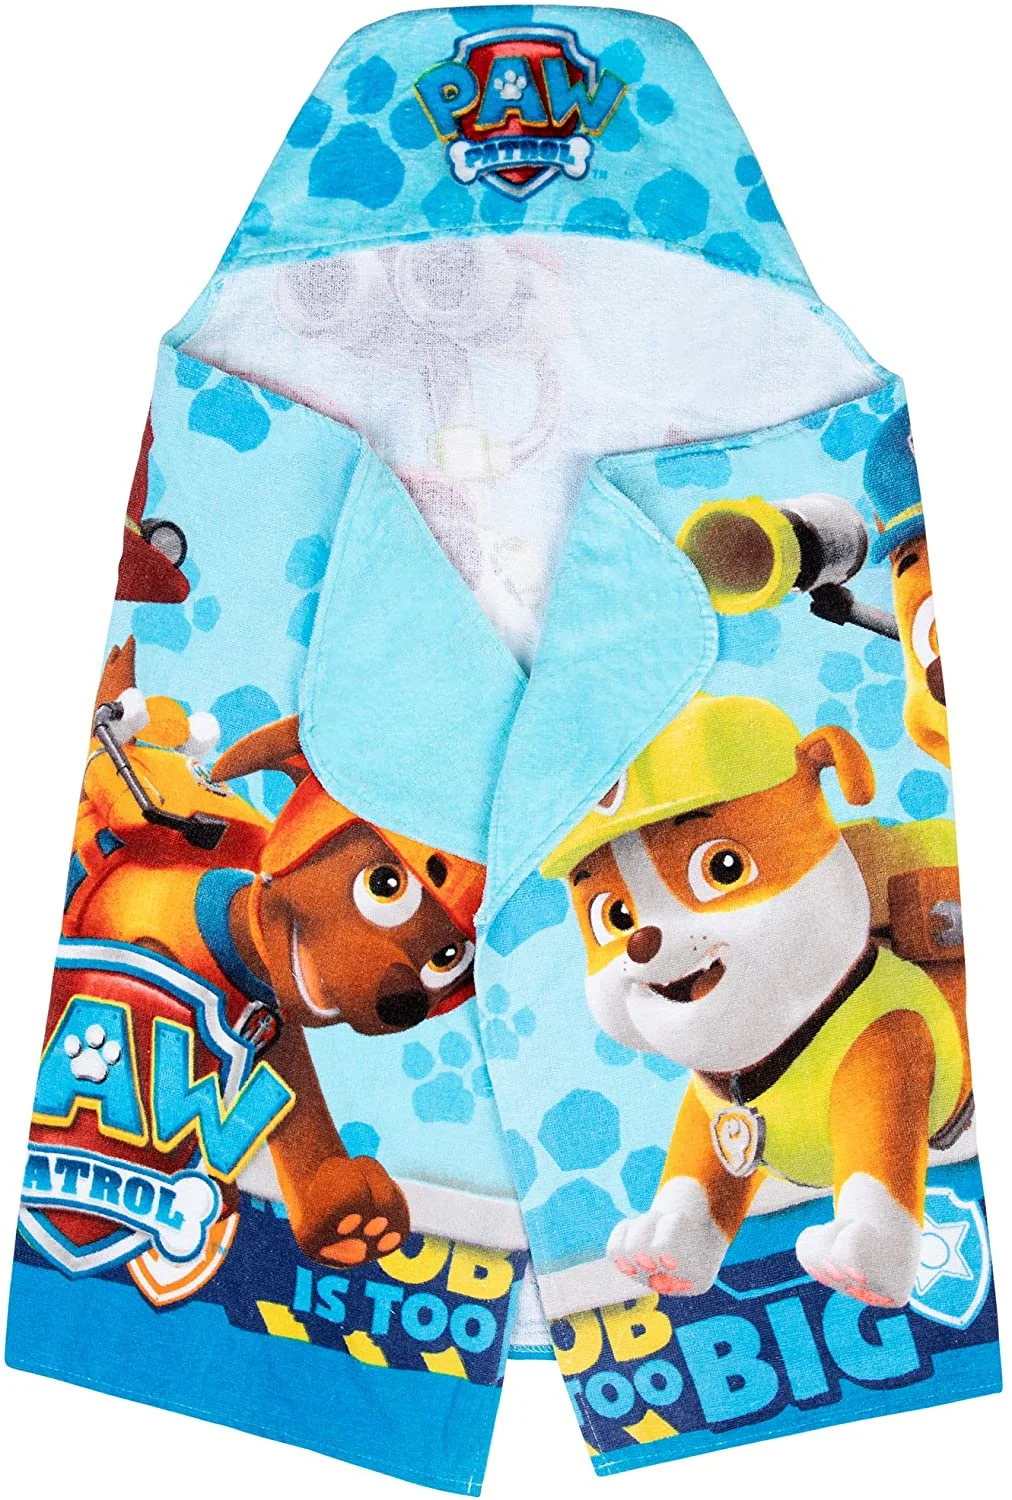 Kids Bath and Beach Soft Cotton Terry Hooded Towel Wrap, 24